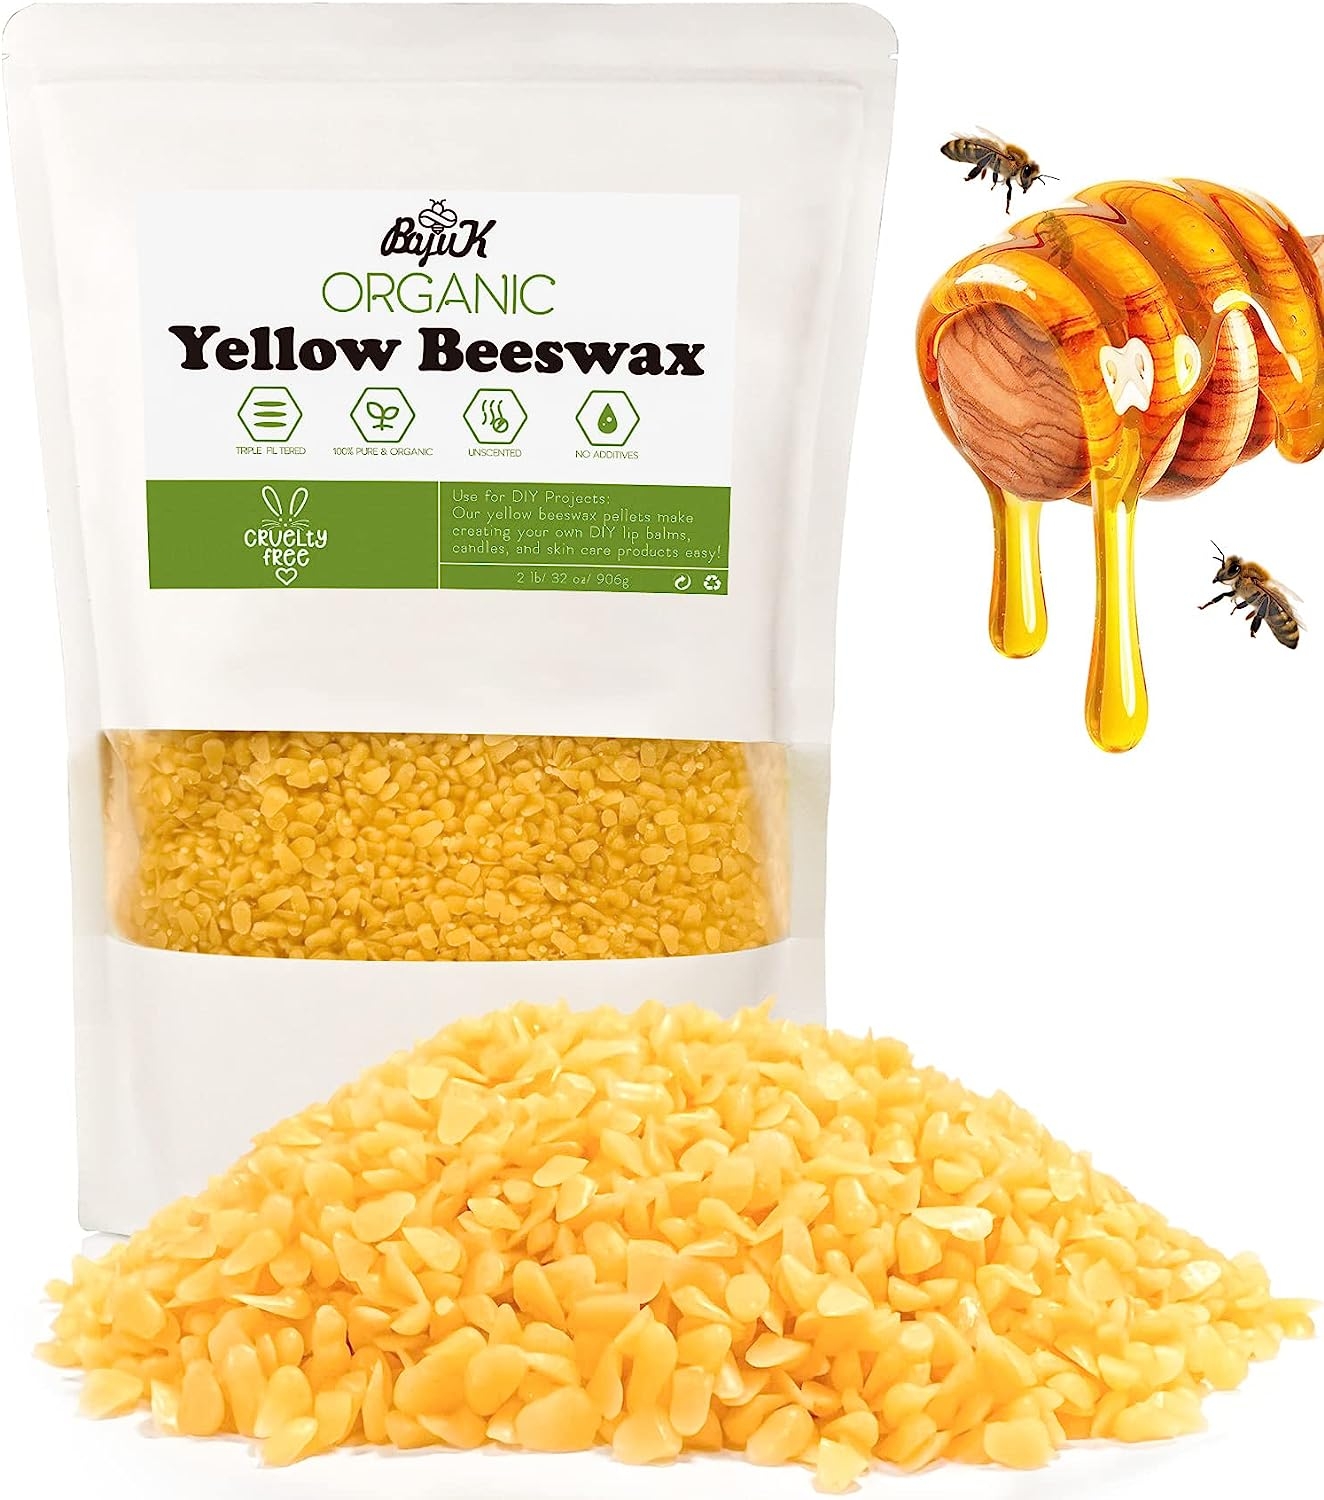 White Beeswax Pellets - 0.5Ib(200g) Beeswax for Candle Making